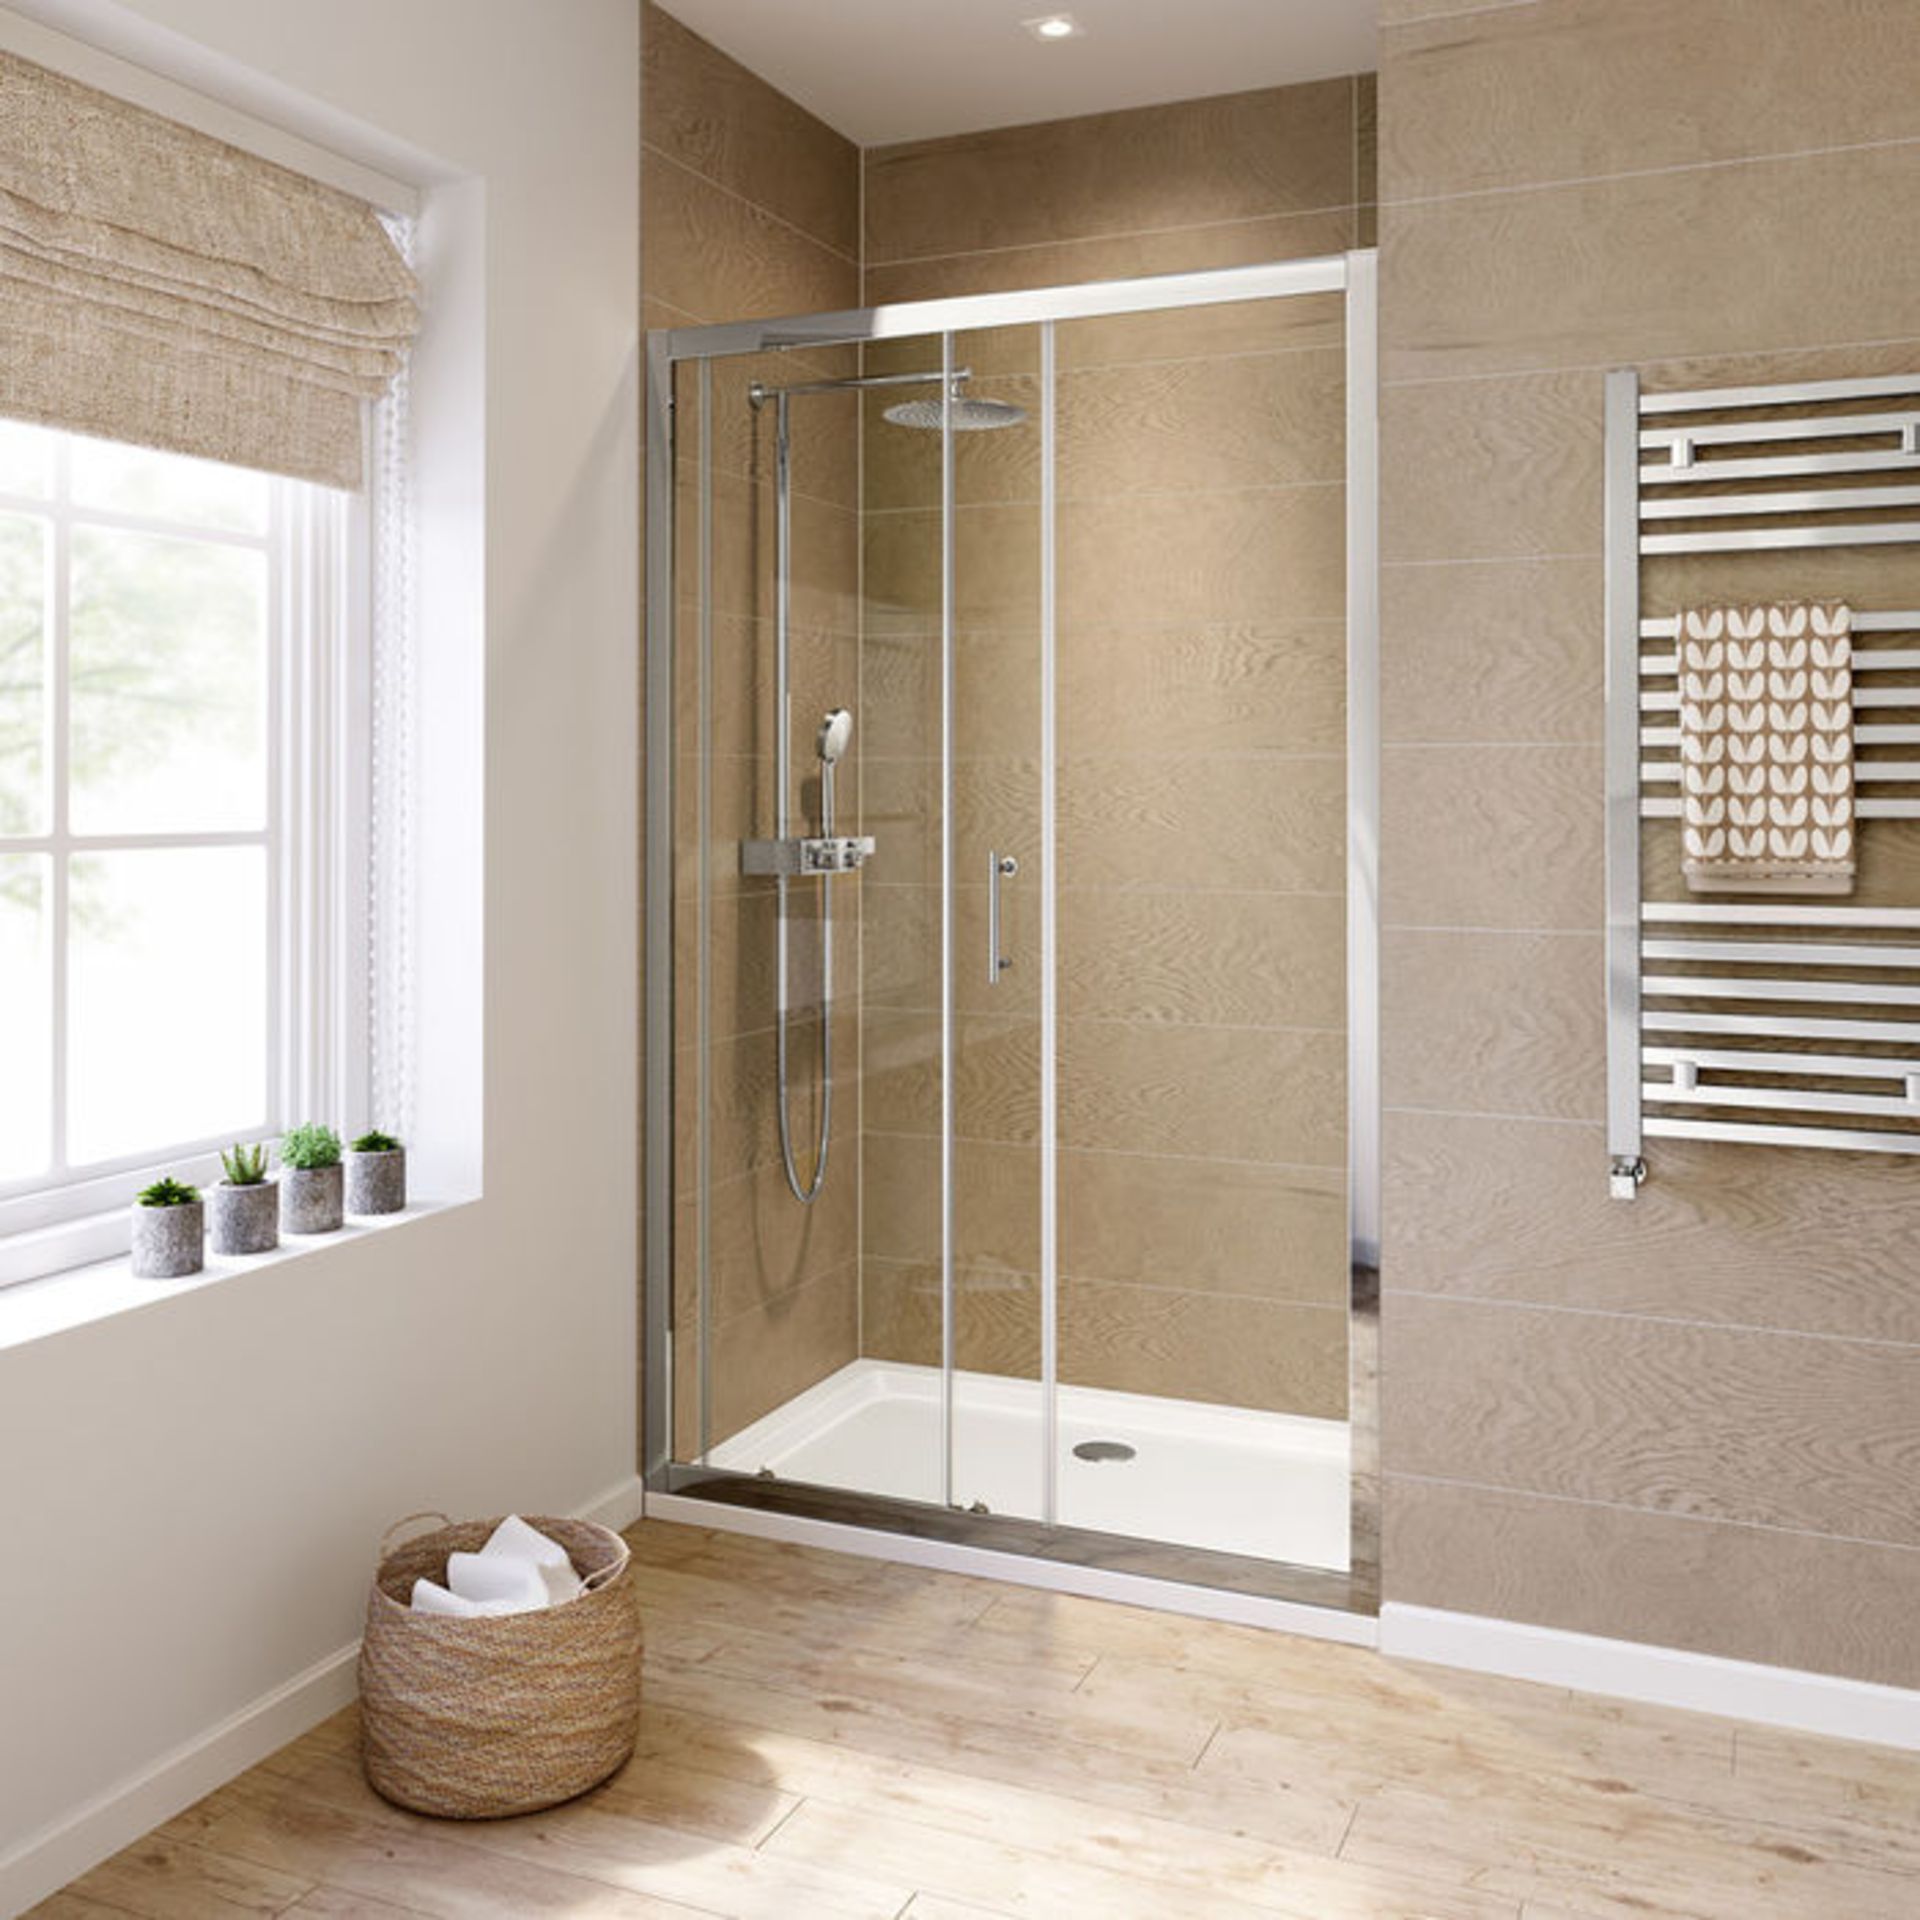 (ZA17) 1200mm - 6mm - Elements Sliding Shower Door. RRP £299.99. _x00D_6mm Safety Glass_x00D_Fully - Image 3 of 3